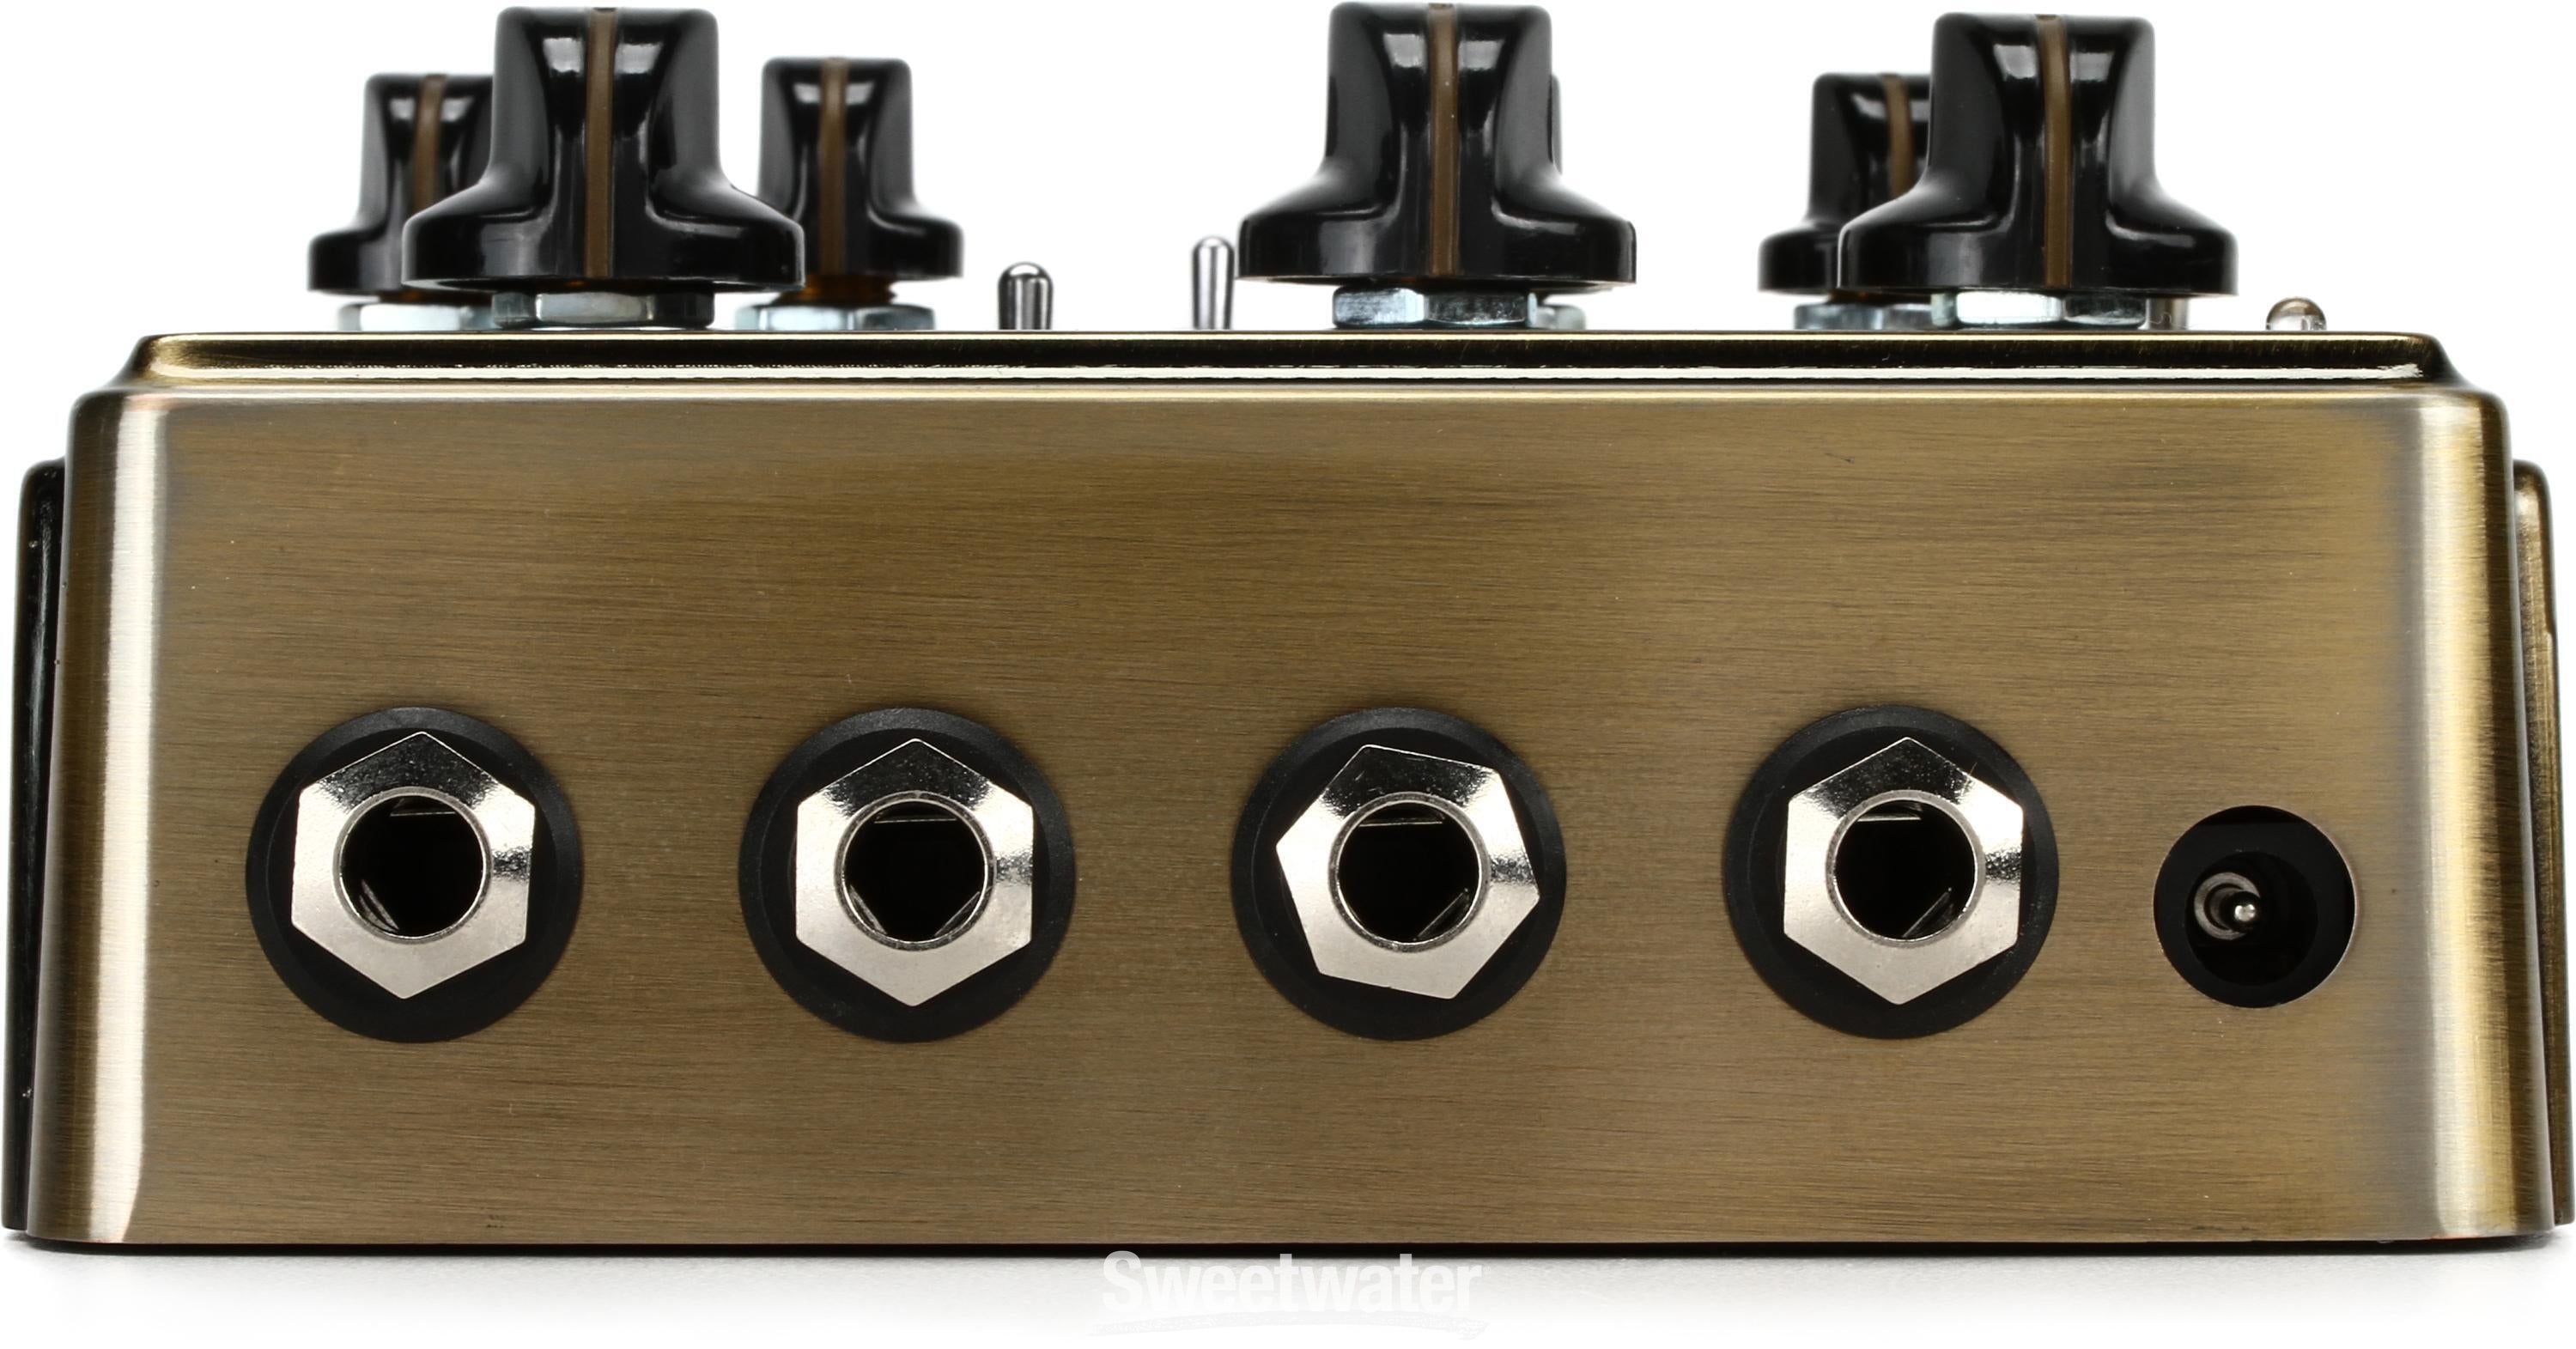 Egnater Goldsmith Overdrive and Boost Pedal | Sweetwater